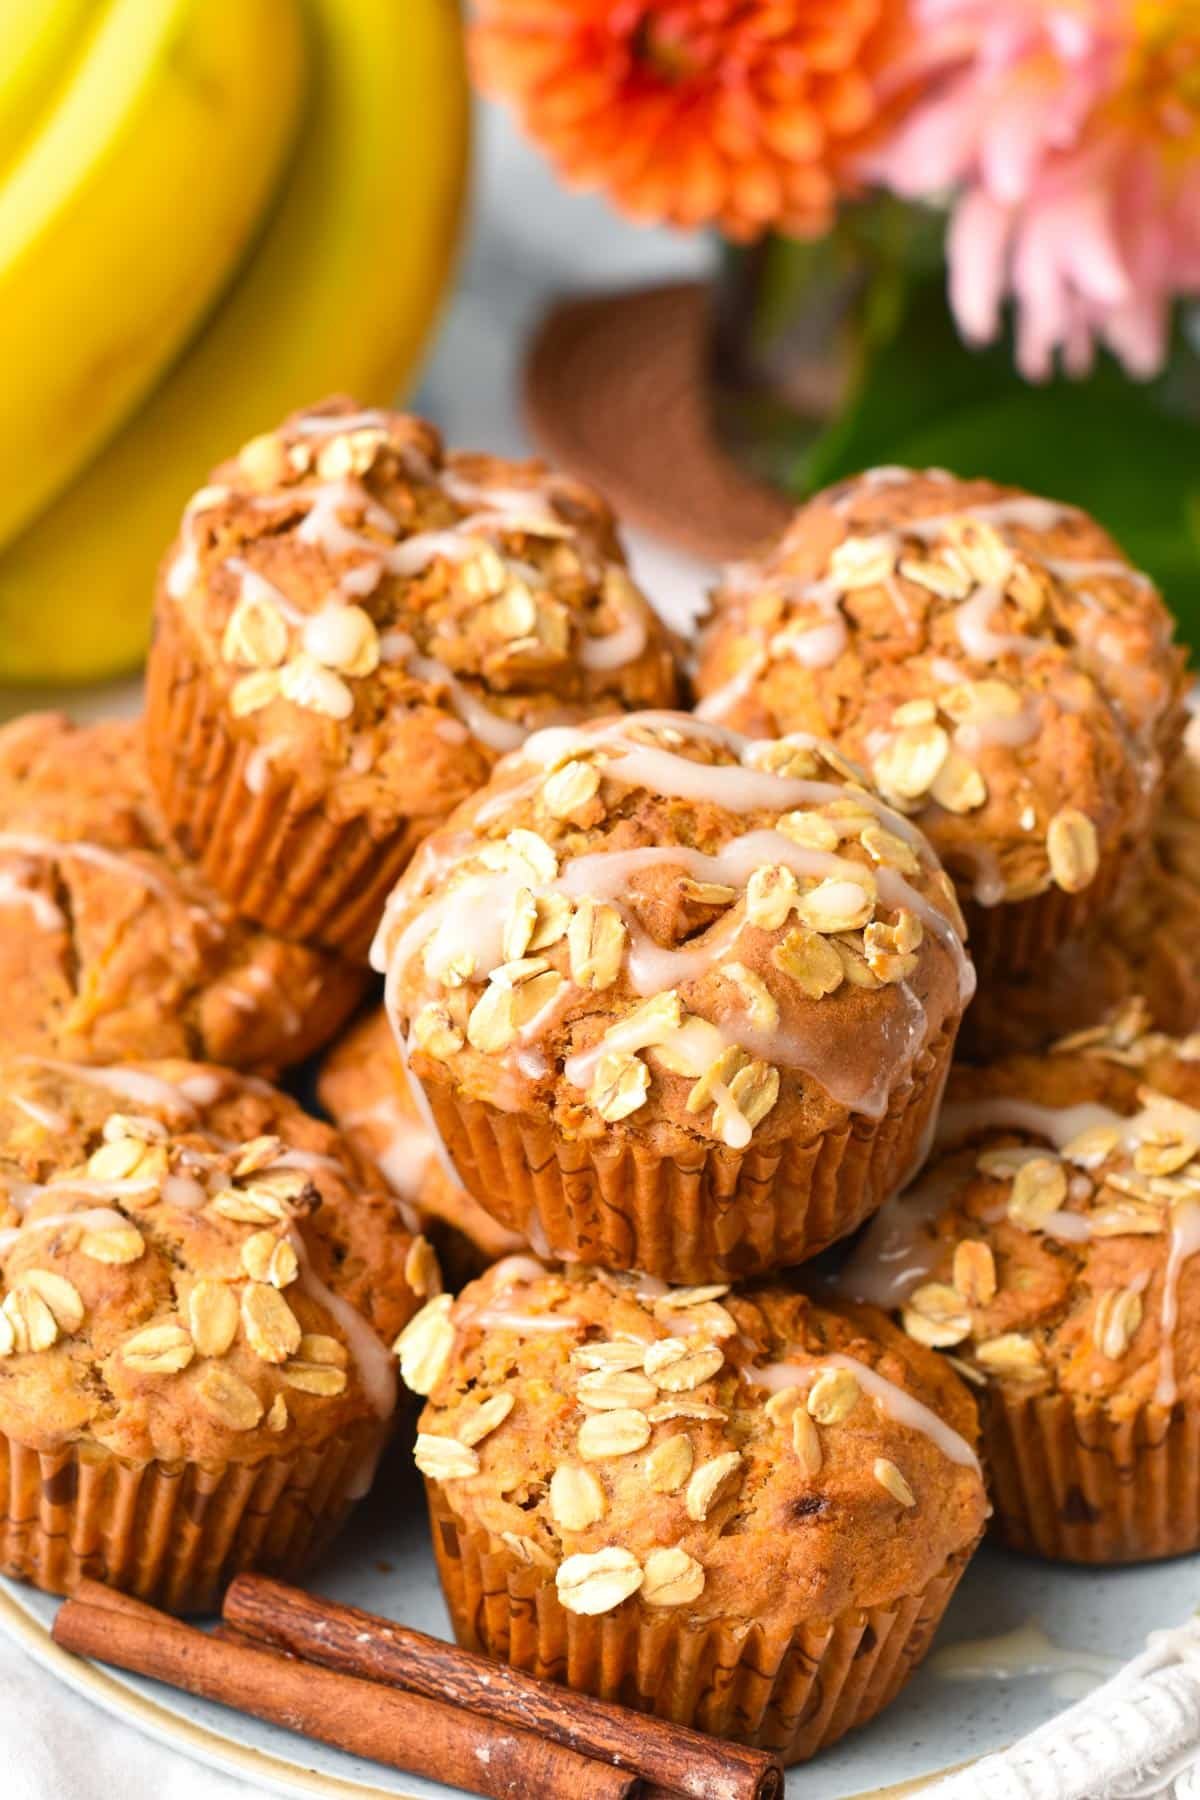 A plate filled with a stack of banana carrot muffins with oats on op and banana and orange flowers in the background.